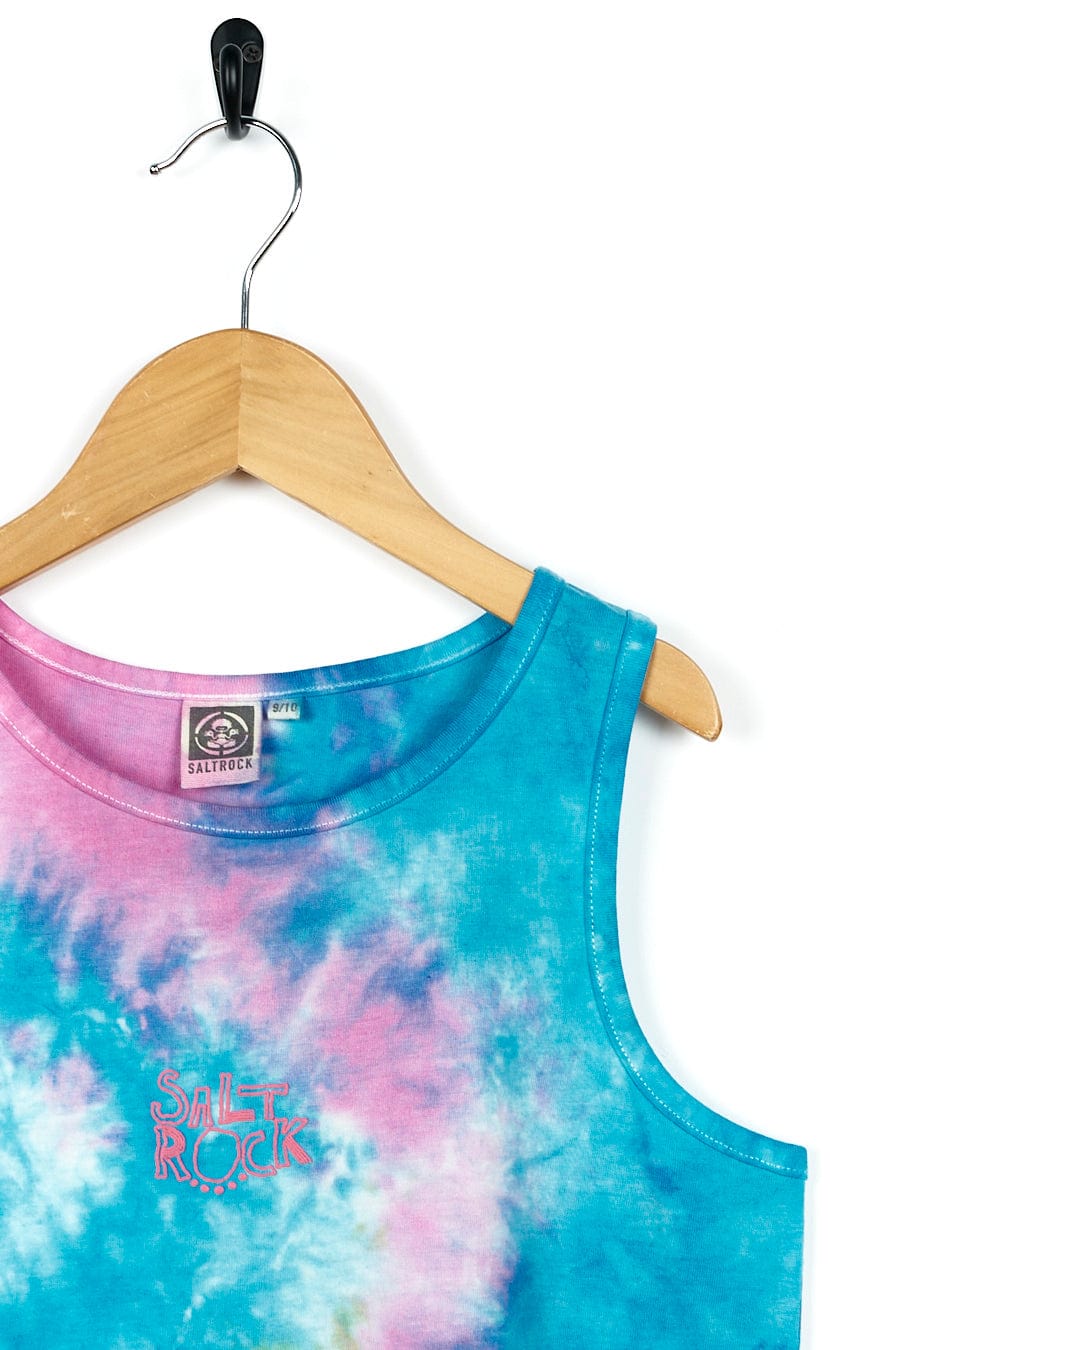 A blue and pink Coralia - Kids Tie Dye Midi Dress - Pink tank top hanging on a hanger by Saltrock.